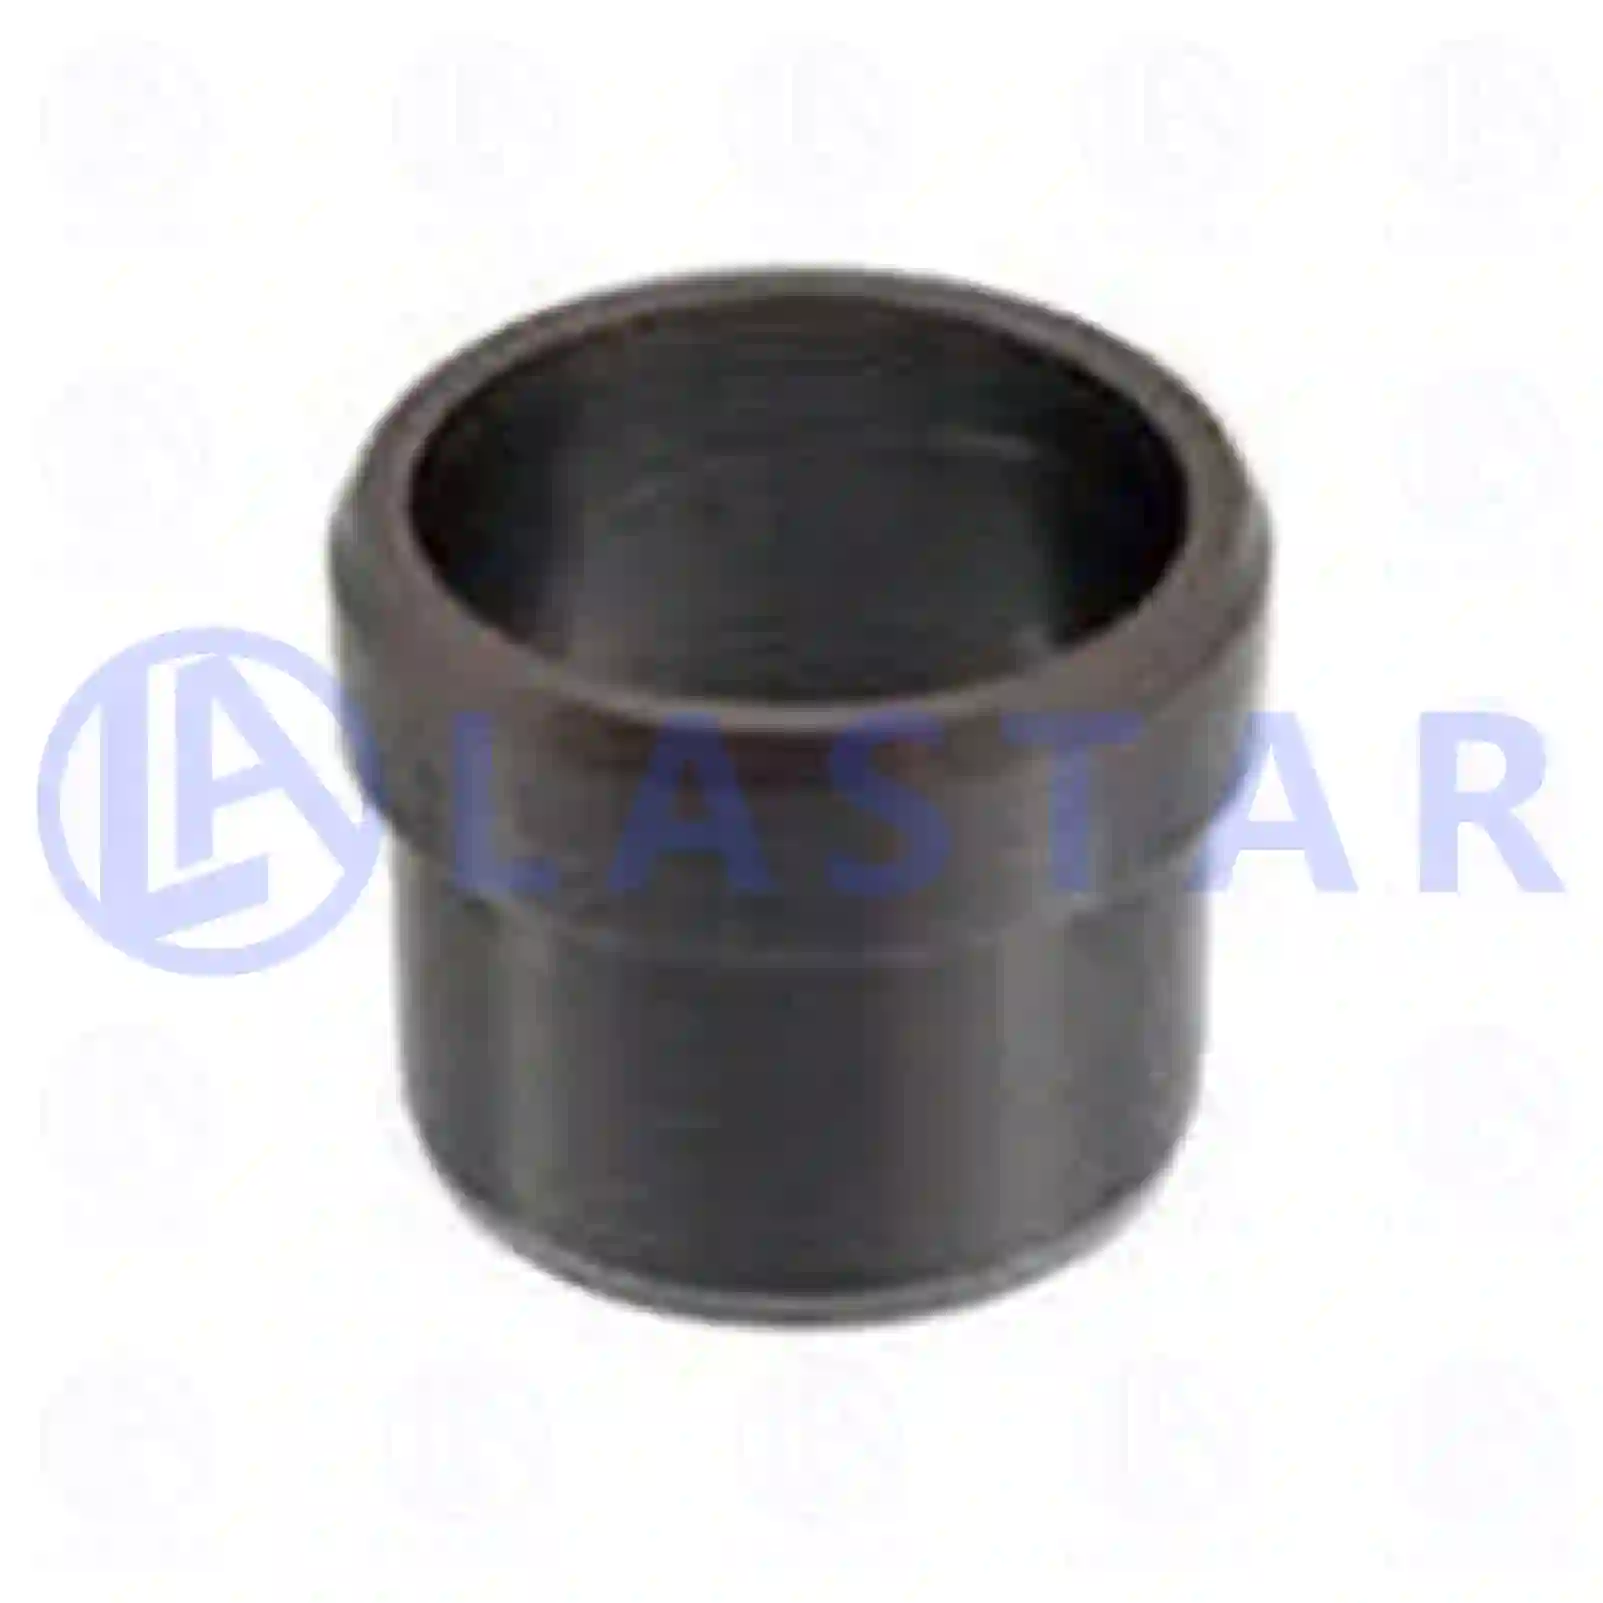 Fixation sleeve, 77701729, 51917010274, 1079910041, , ||  77701729 Lastar Spare Part | Truck Spare Parts, Auotomotive Spare Parts Fixation sleeve, 77701729, 51917010274, 1079910041, , ||  77701729 Lastar Spare Part | Truck Spare Parts, Auotomotive Spare Parts